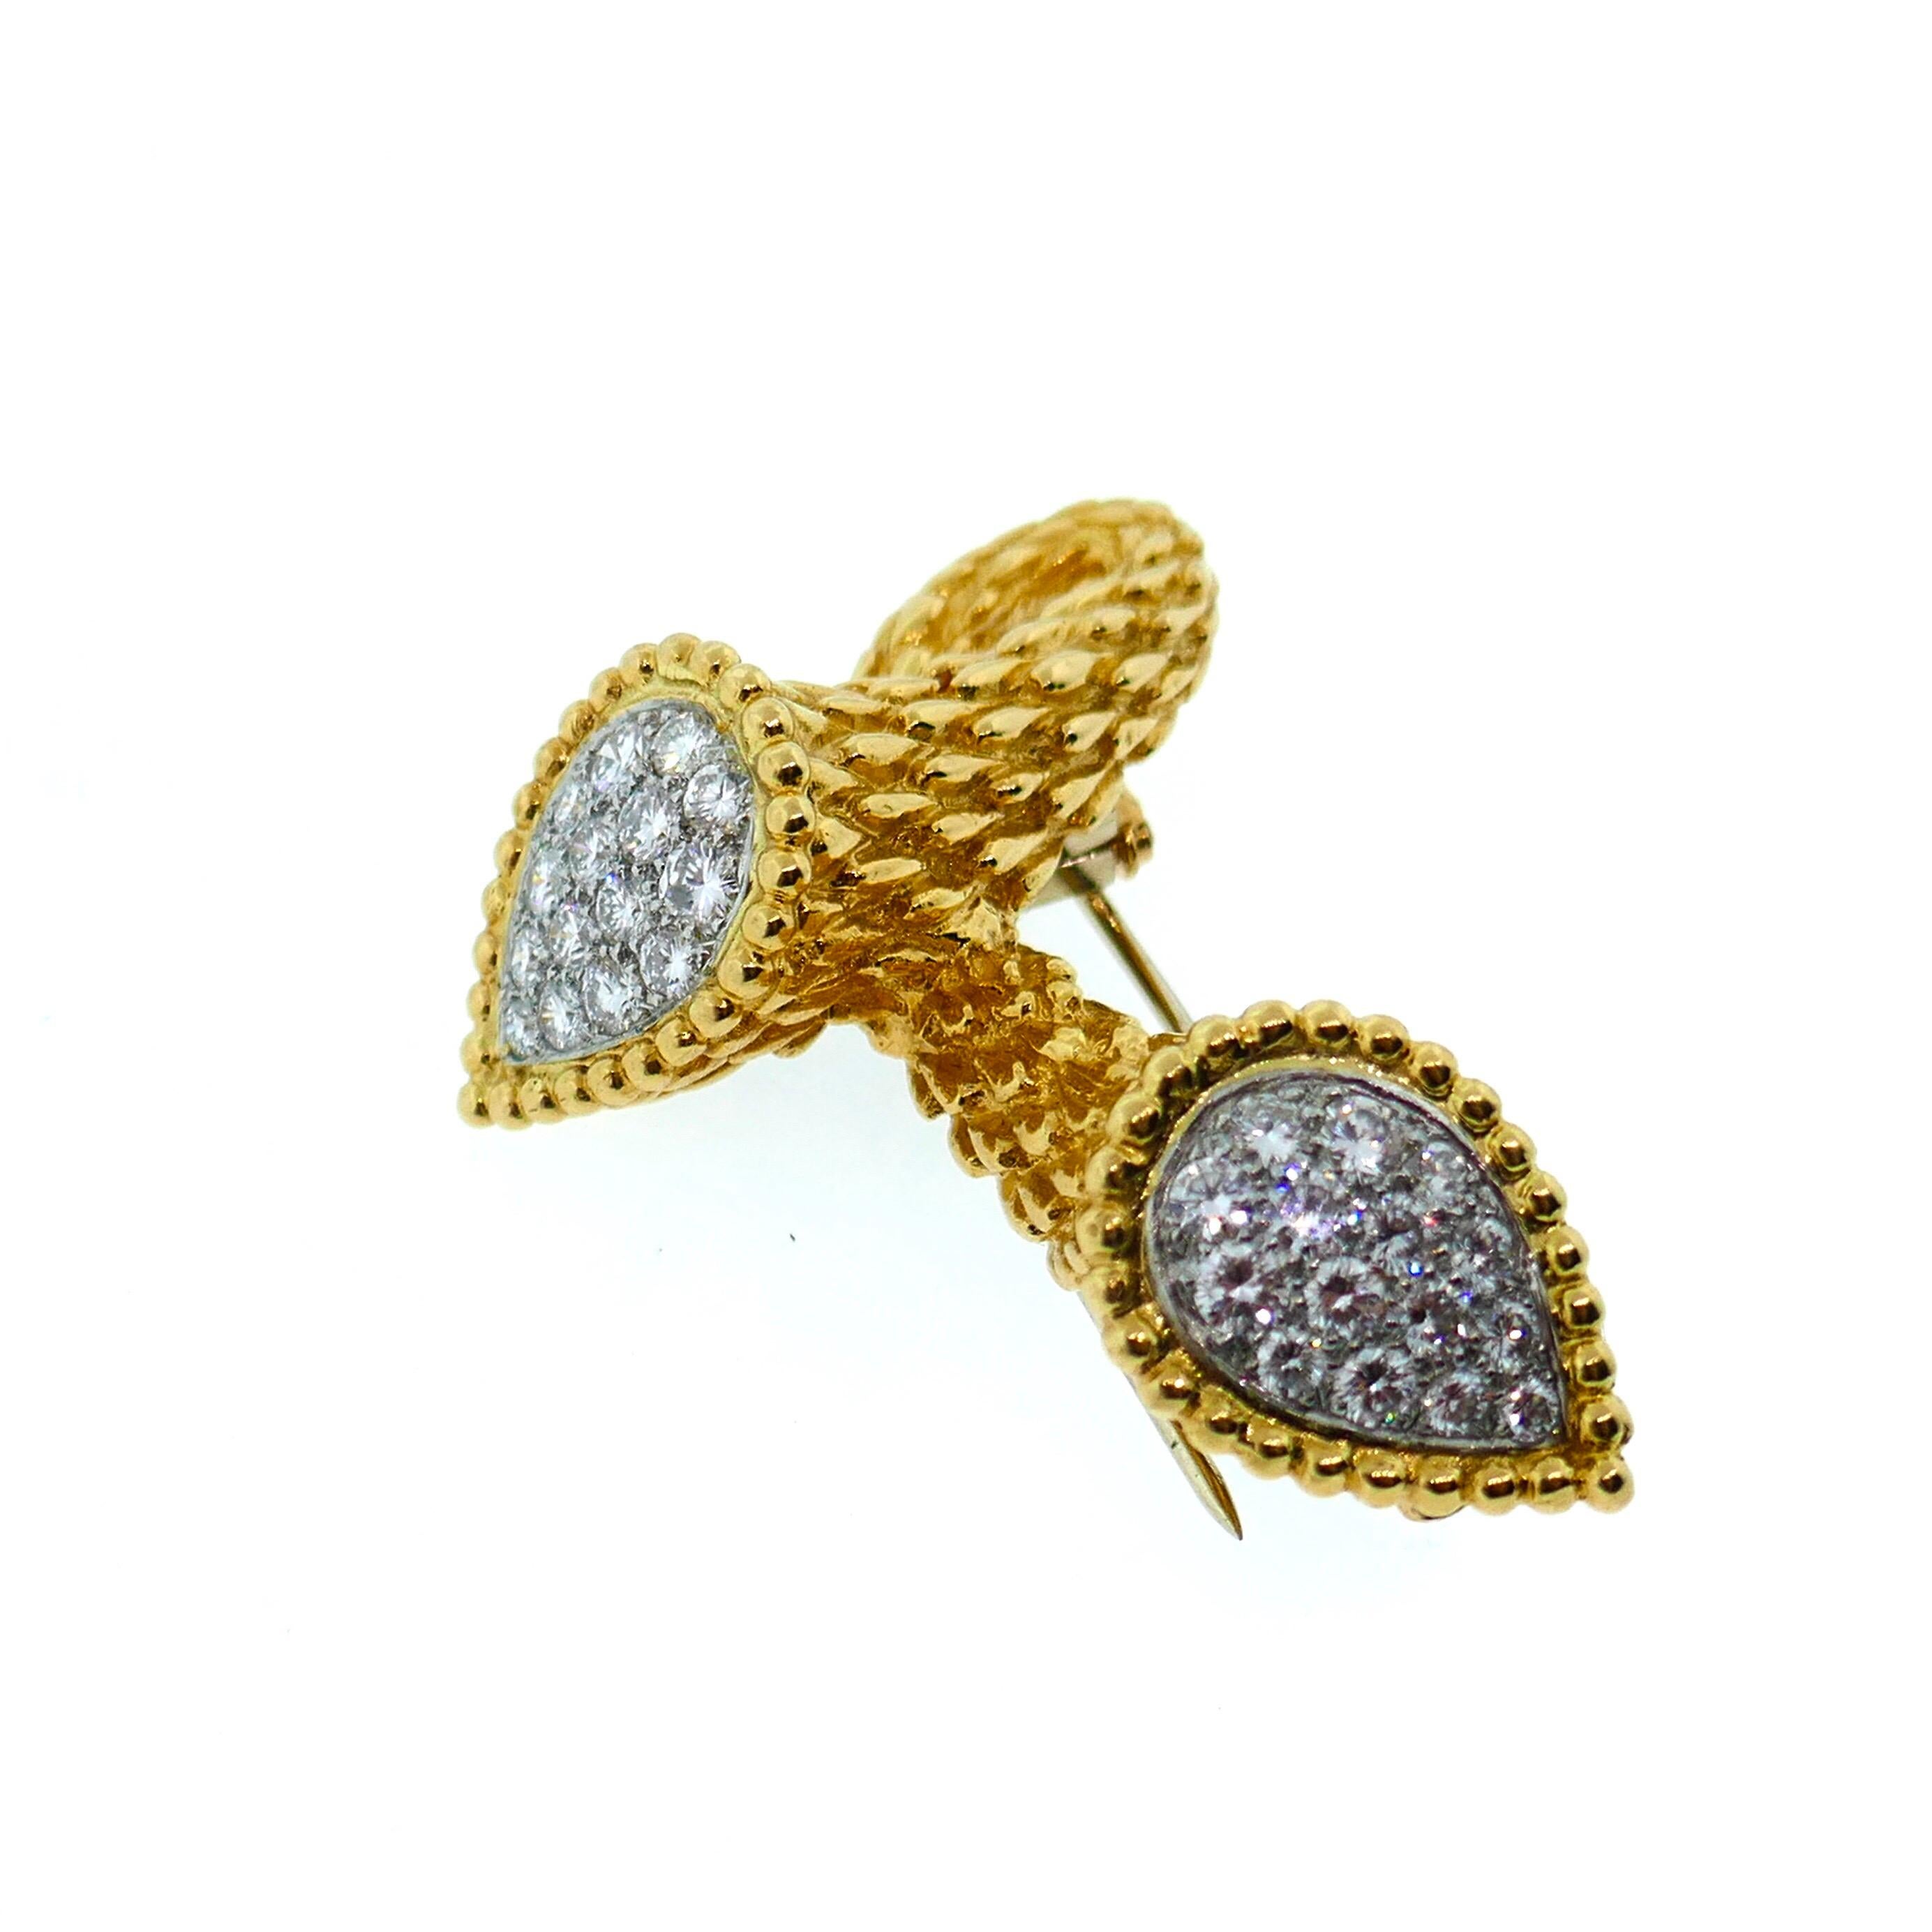 Boucheron 18K Yellow Gold and Diamond Serpent Bohème Toi et Moi Brooch

This is an absolutely beautiful classic Boucheron brooch. It is done in the iconic Toi et Moi (You and Me) motif. It features textured 18k yellow gold and roughly two carats of